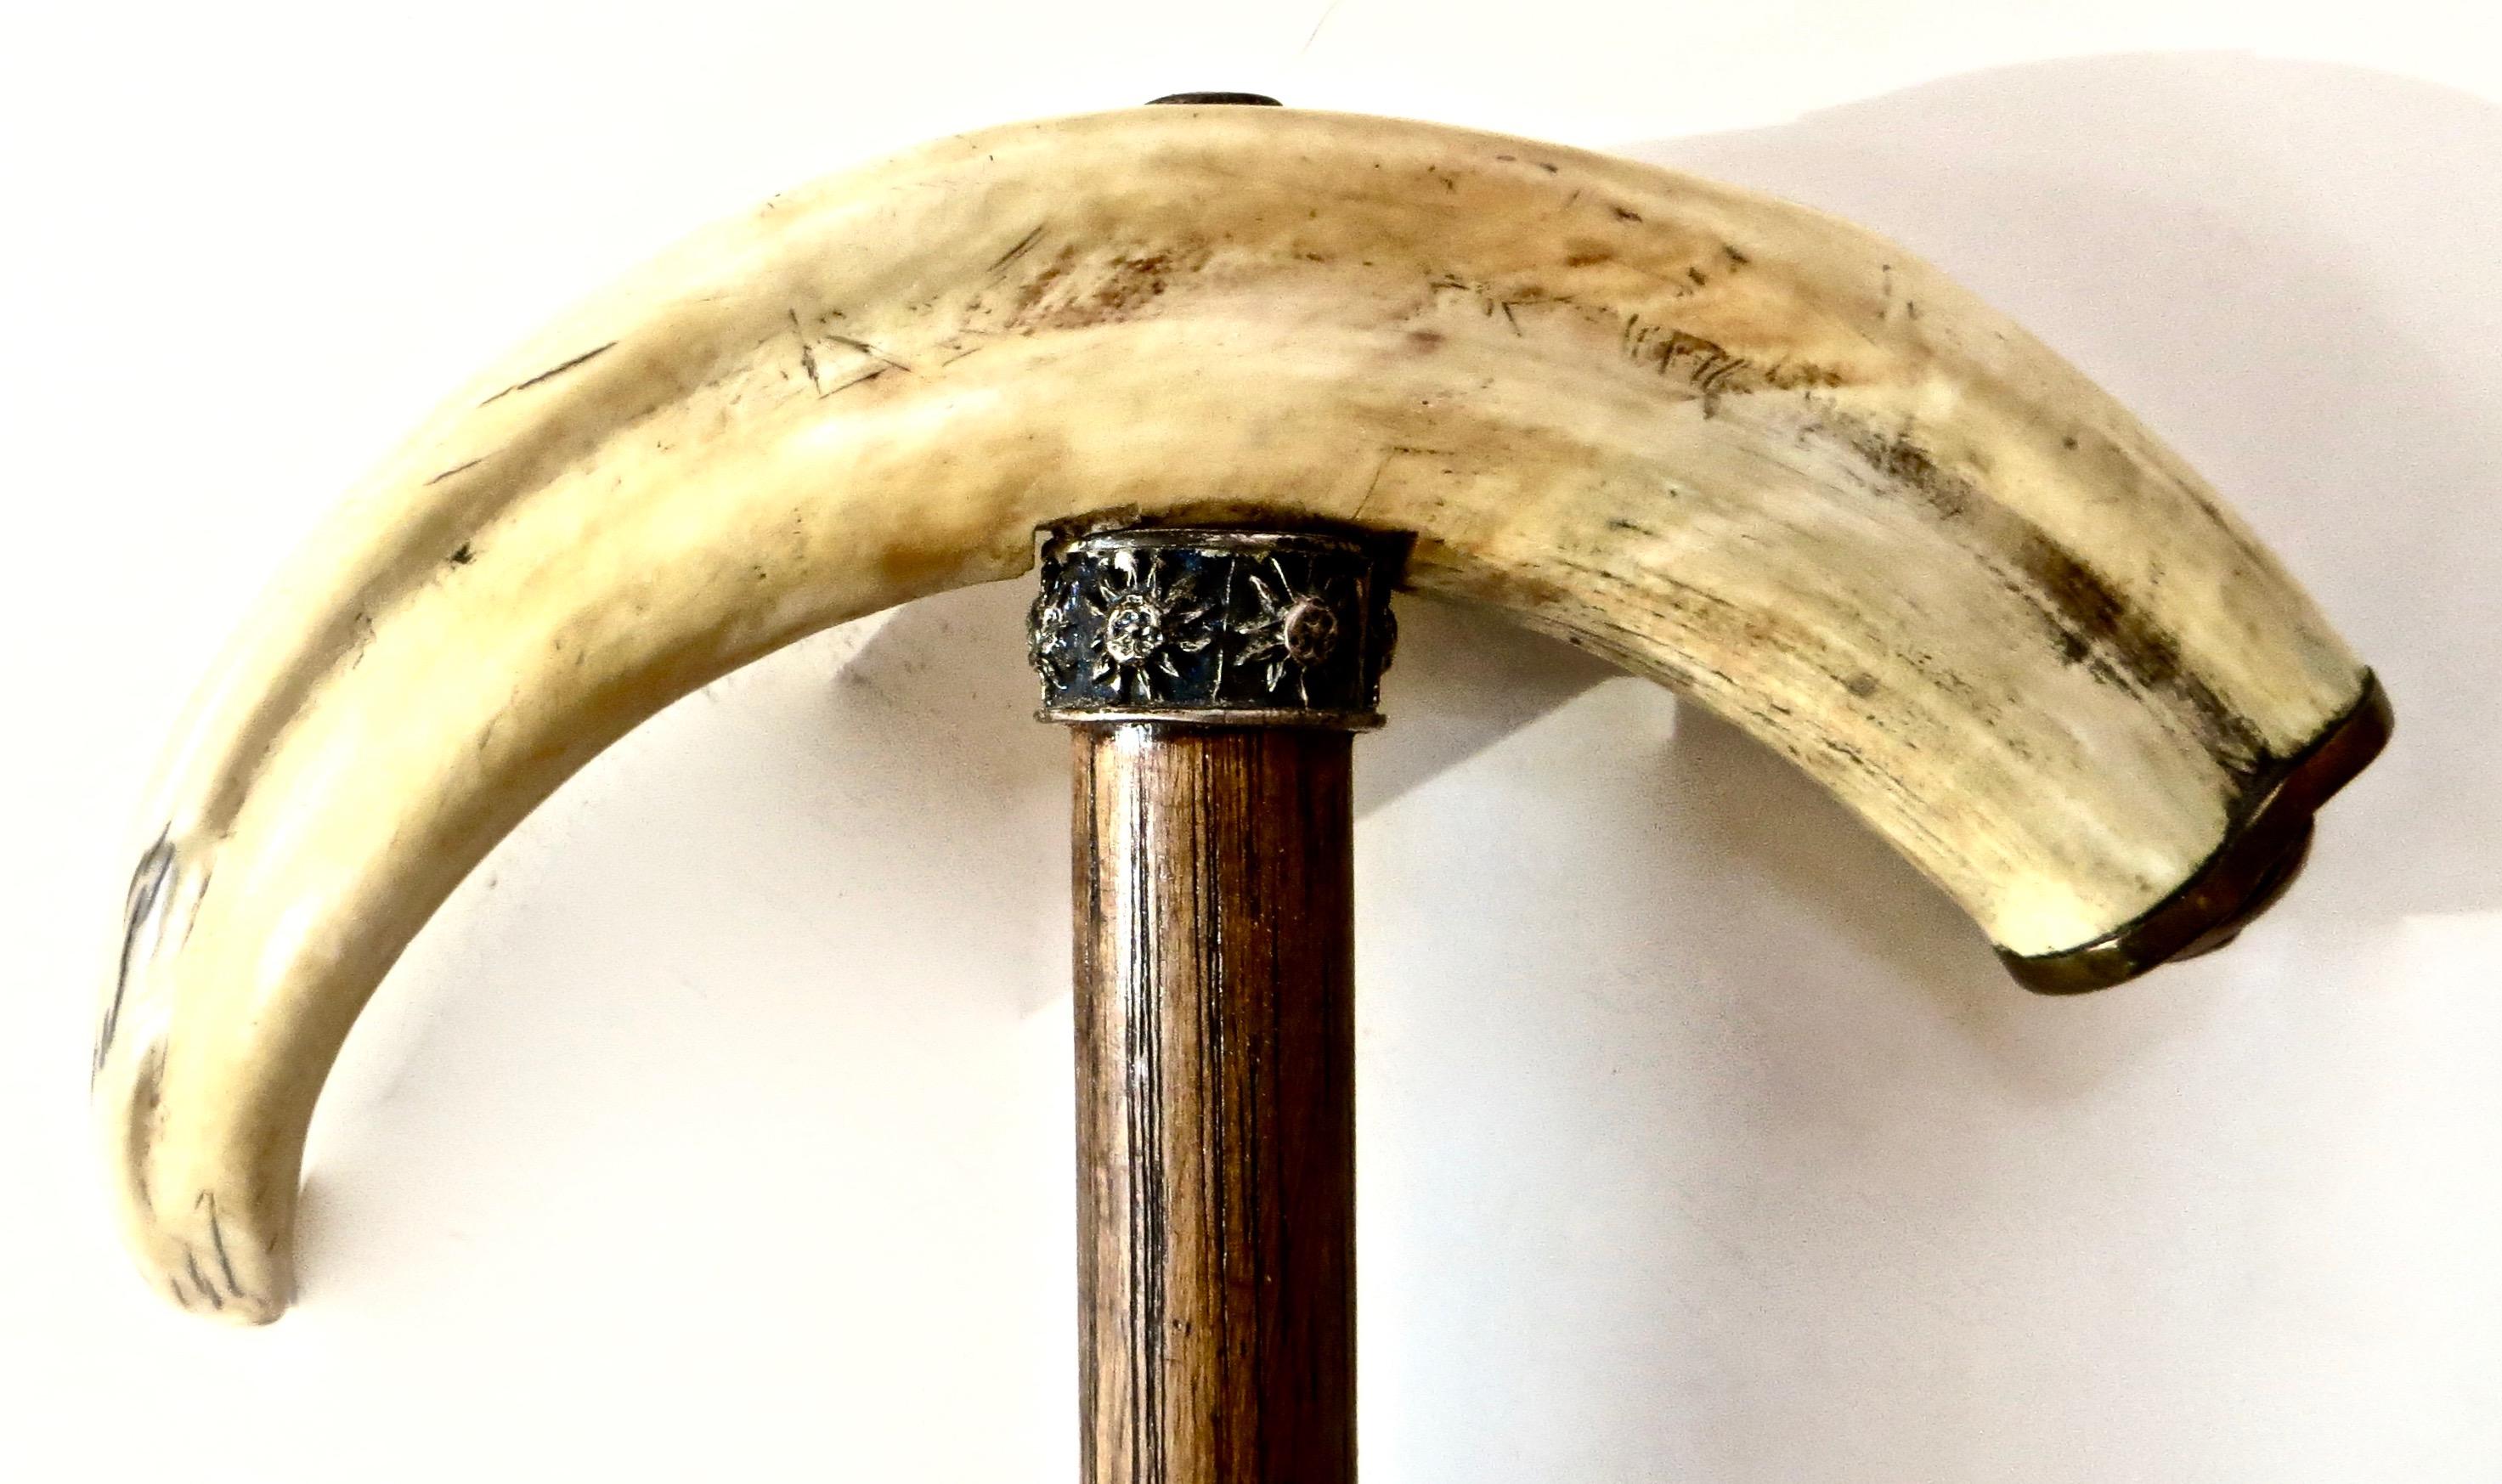 Carved 19th Century Boar's Tusk Handle Walking Stick, American